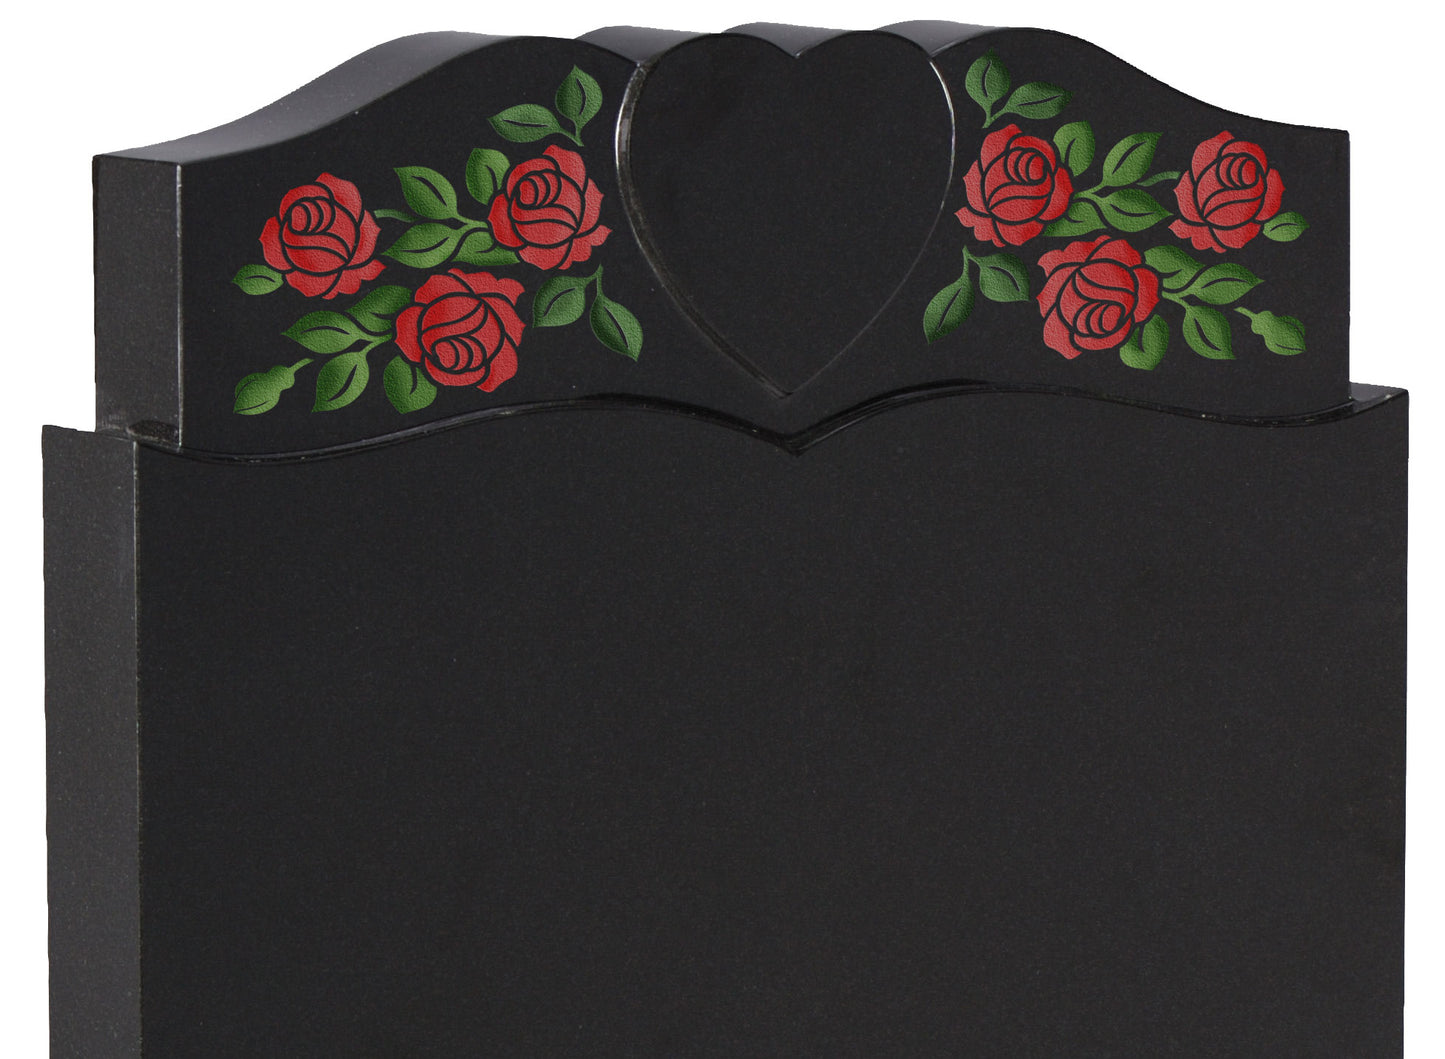 Oval top with cheeks, carved heart and painted roses